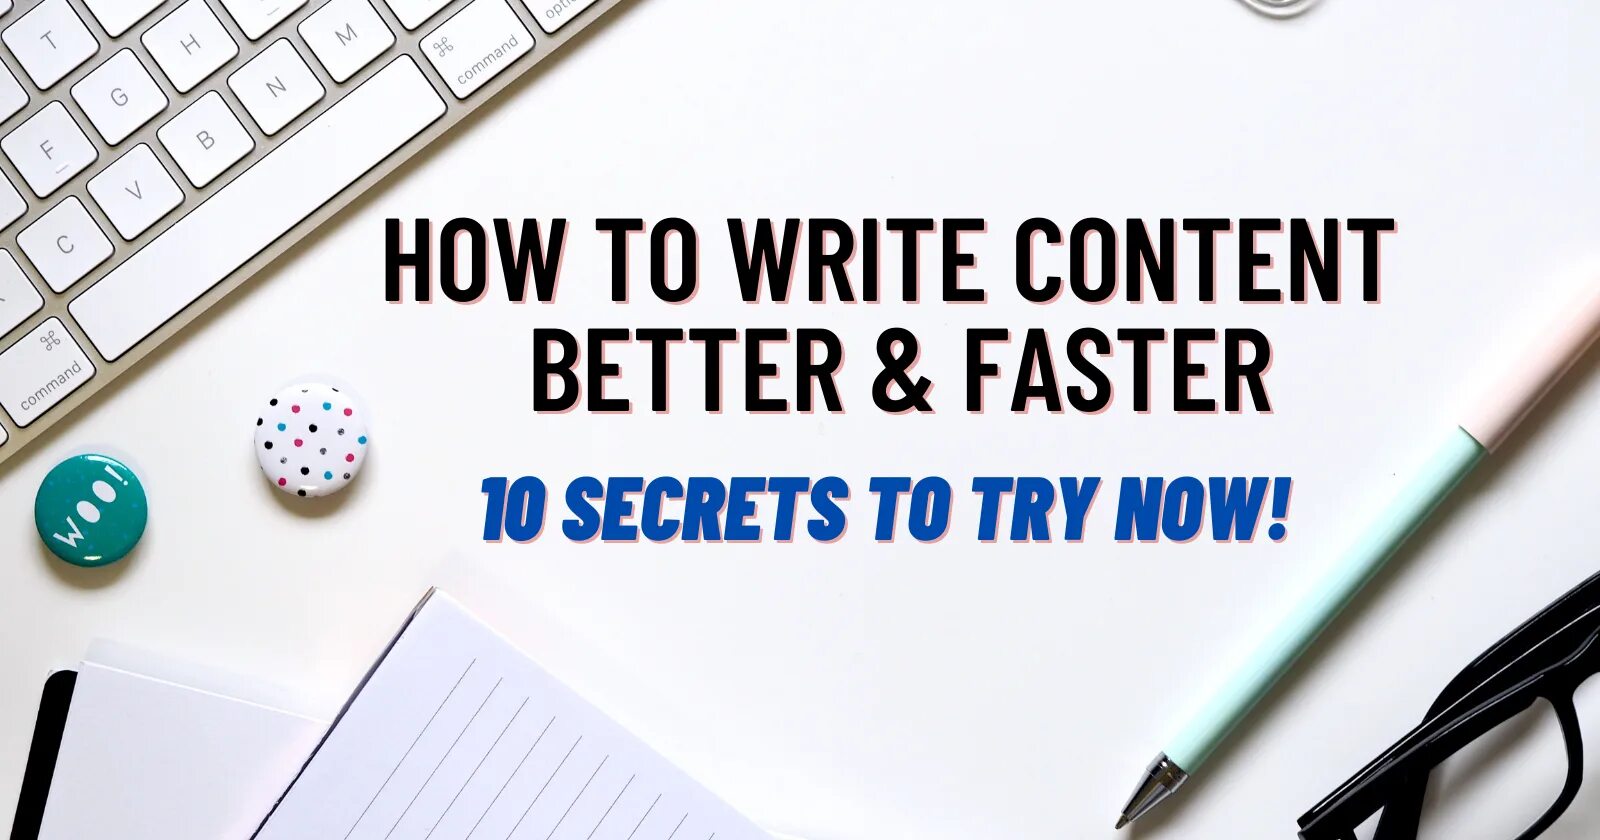 Is the best in writing. How write content.